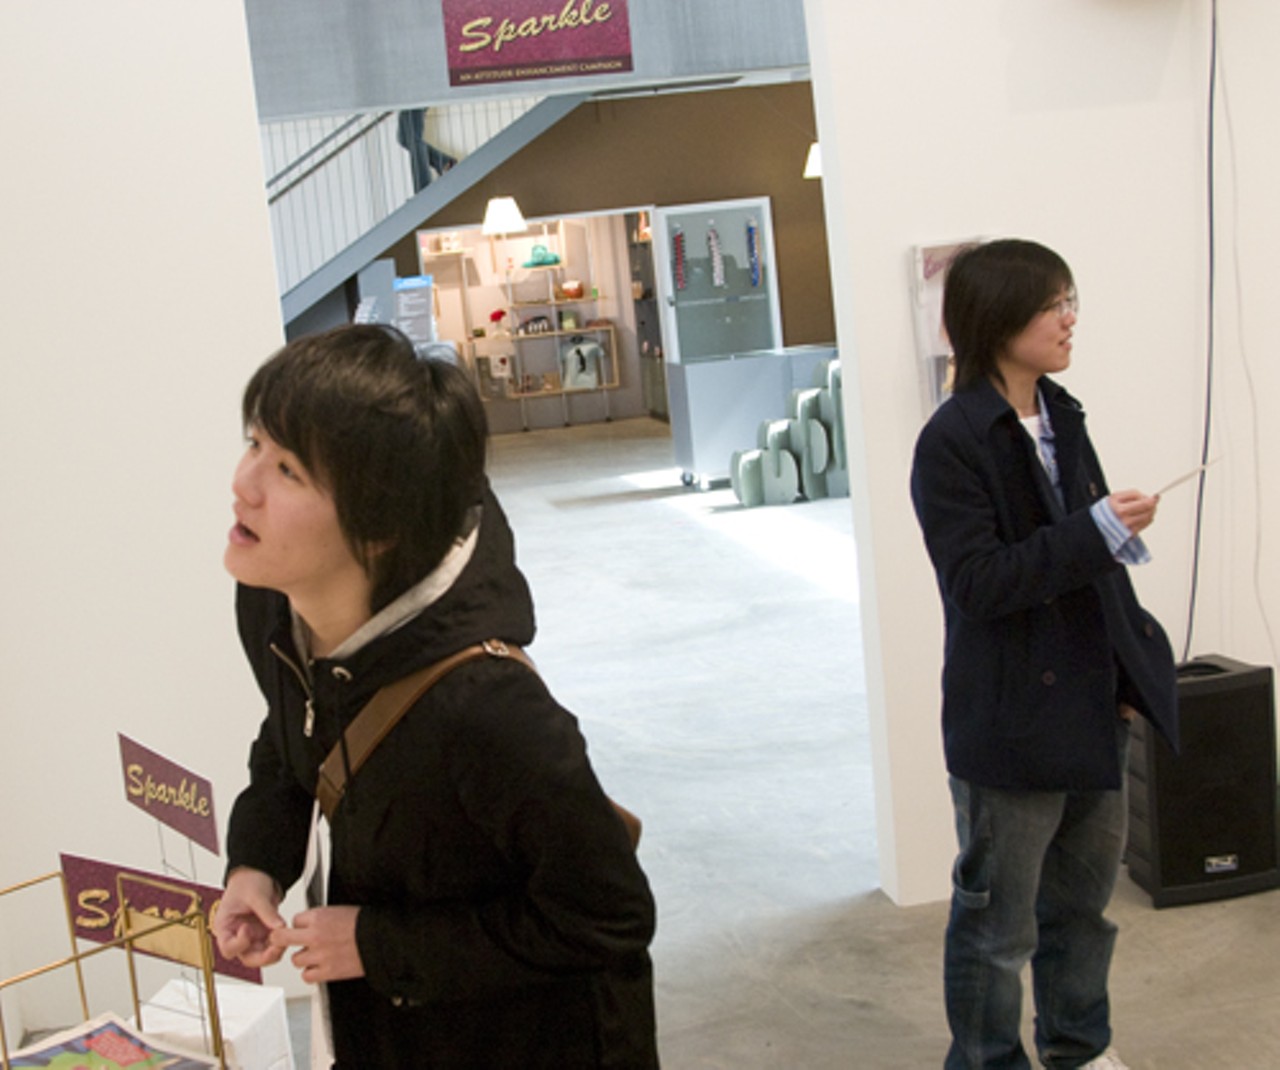 Wil Chiang, left, and Kim Wang who are studying in Champaign, Il from Taiwan scan exhibit.